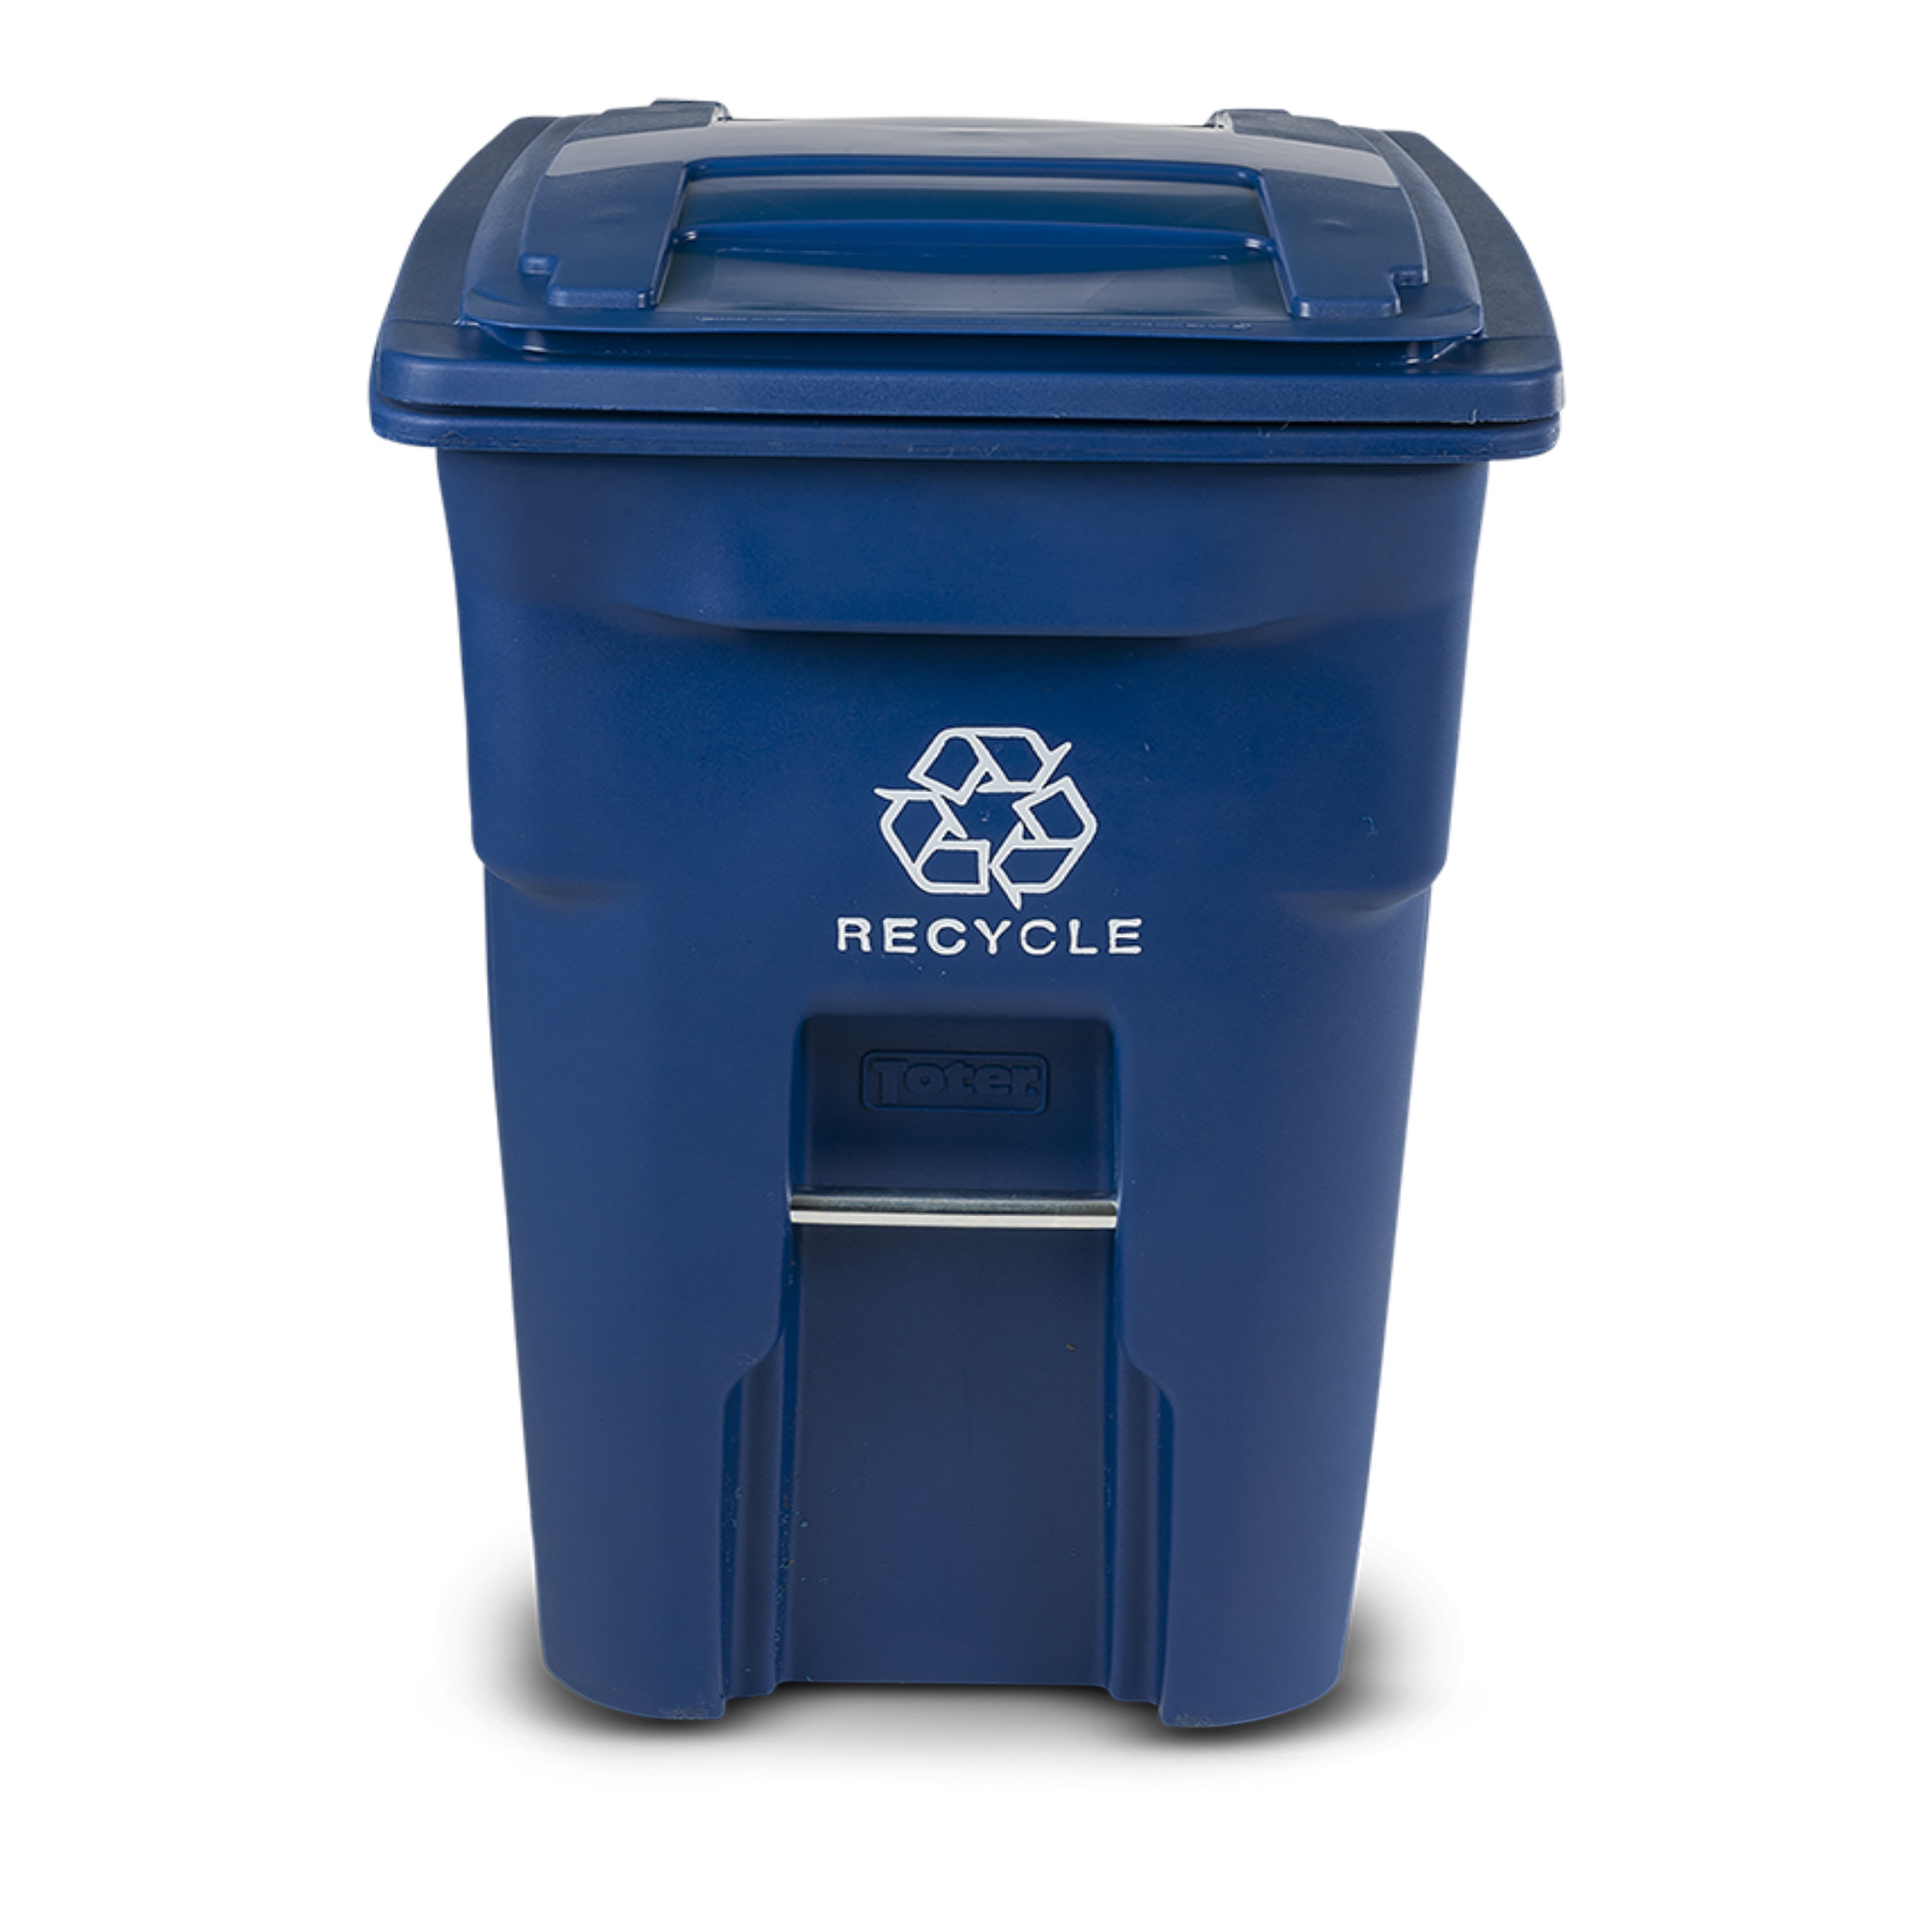 96 Gallon Trash and Recycling Bins For Sale - American Made Dumpsters